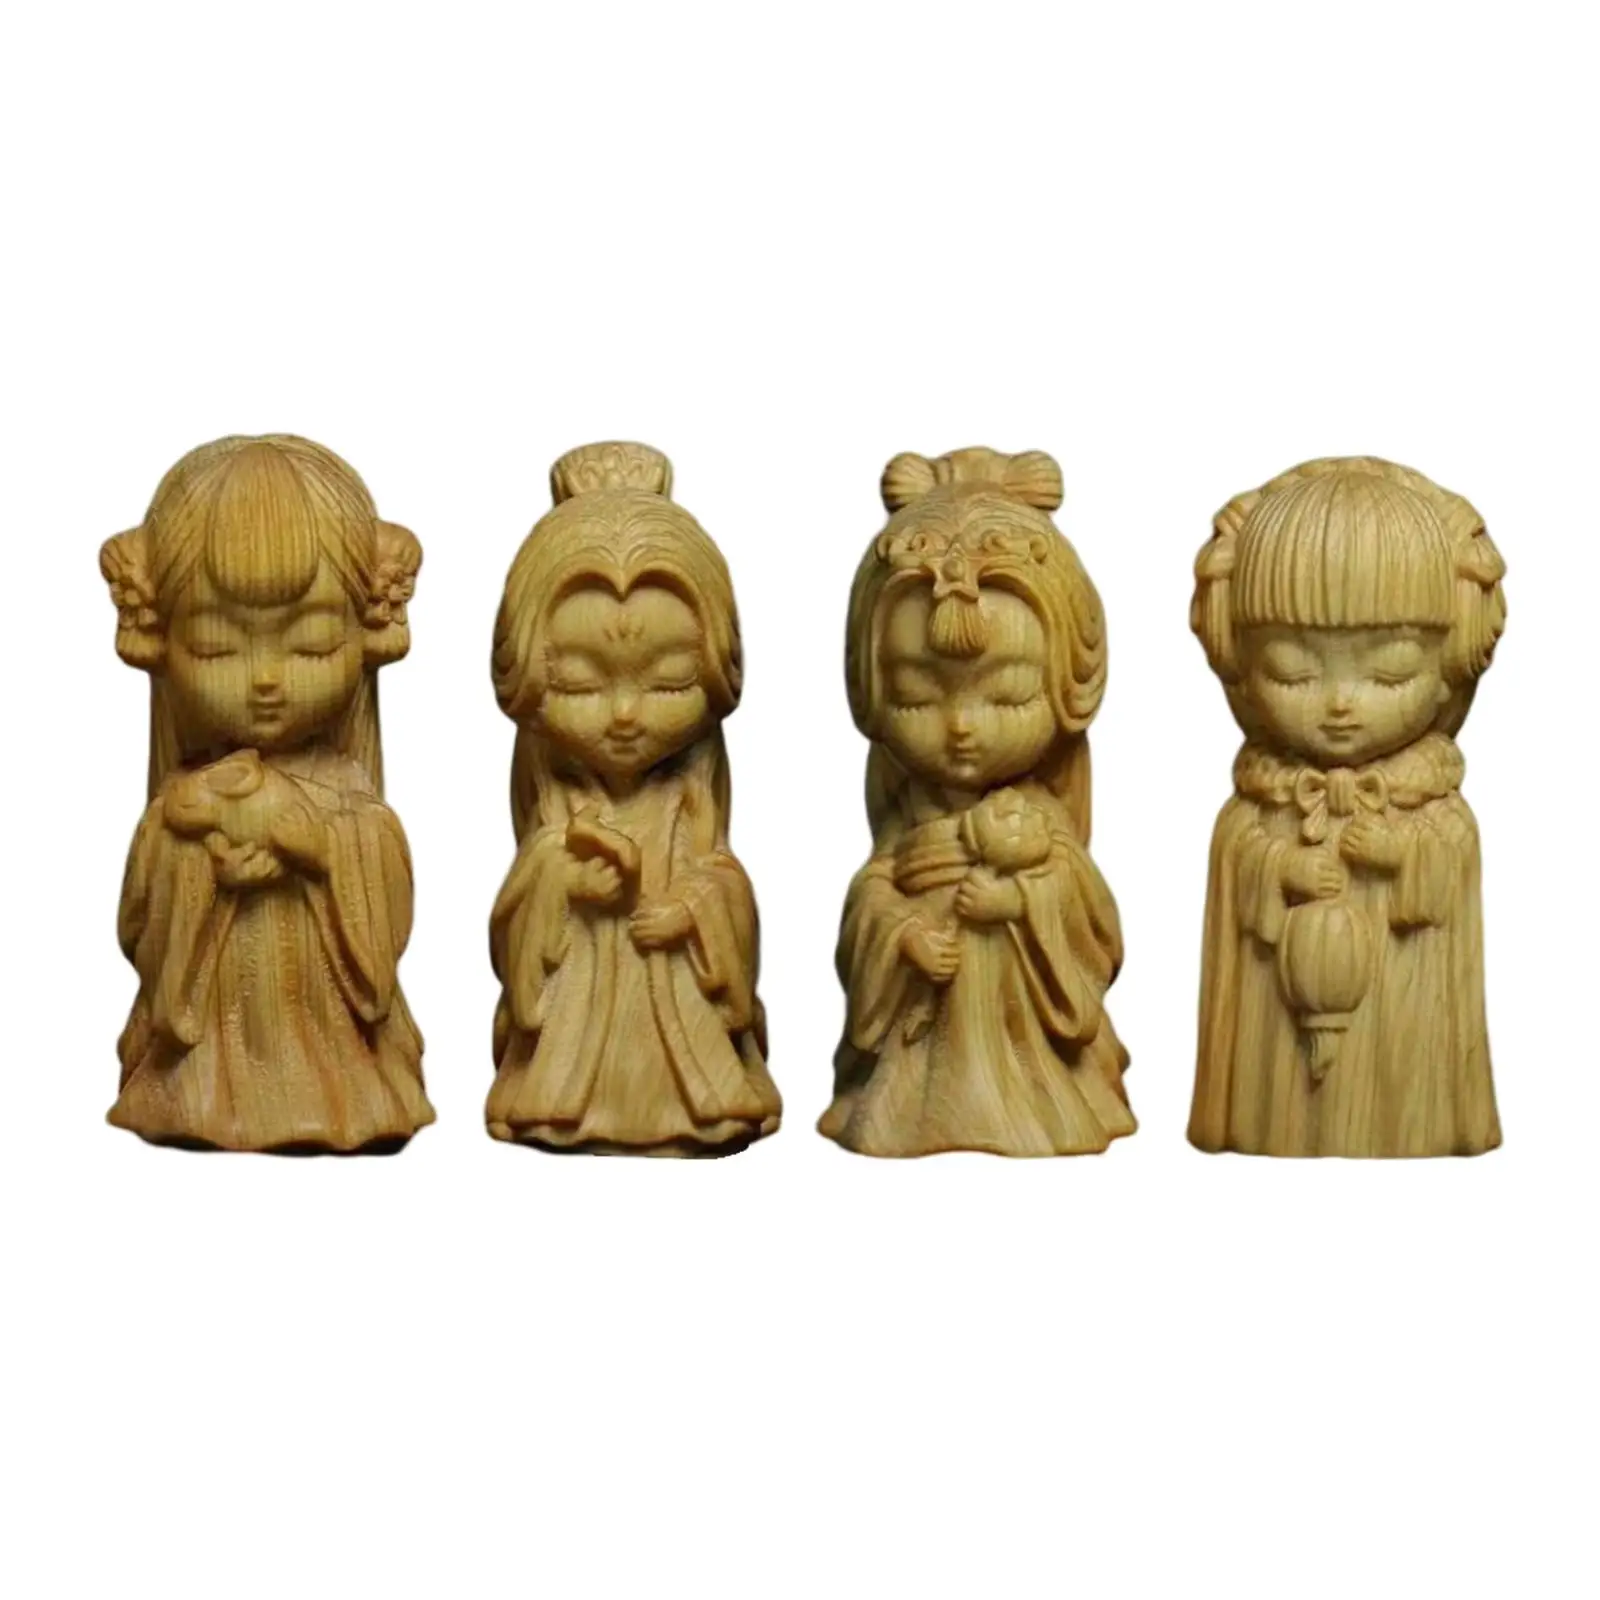 Cute Four Beauties Ornament Crafts Ornament Hand Carved for Office Home Desk